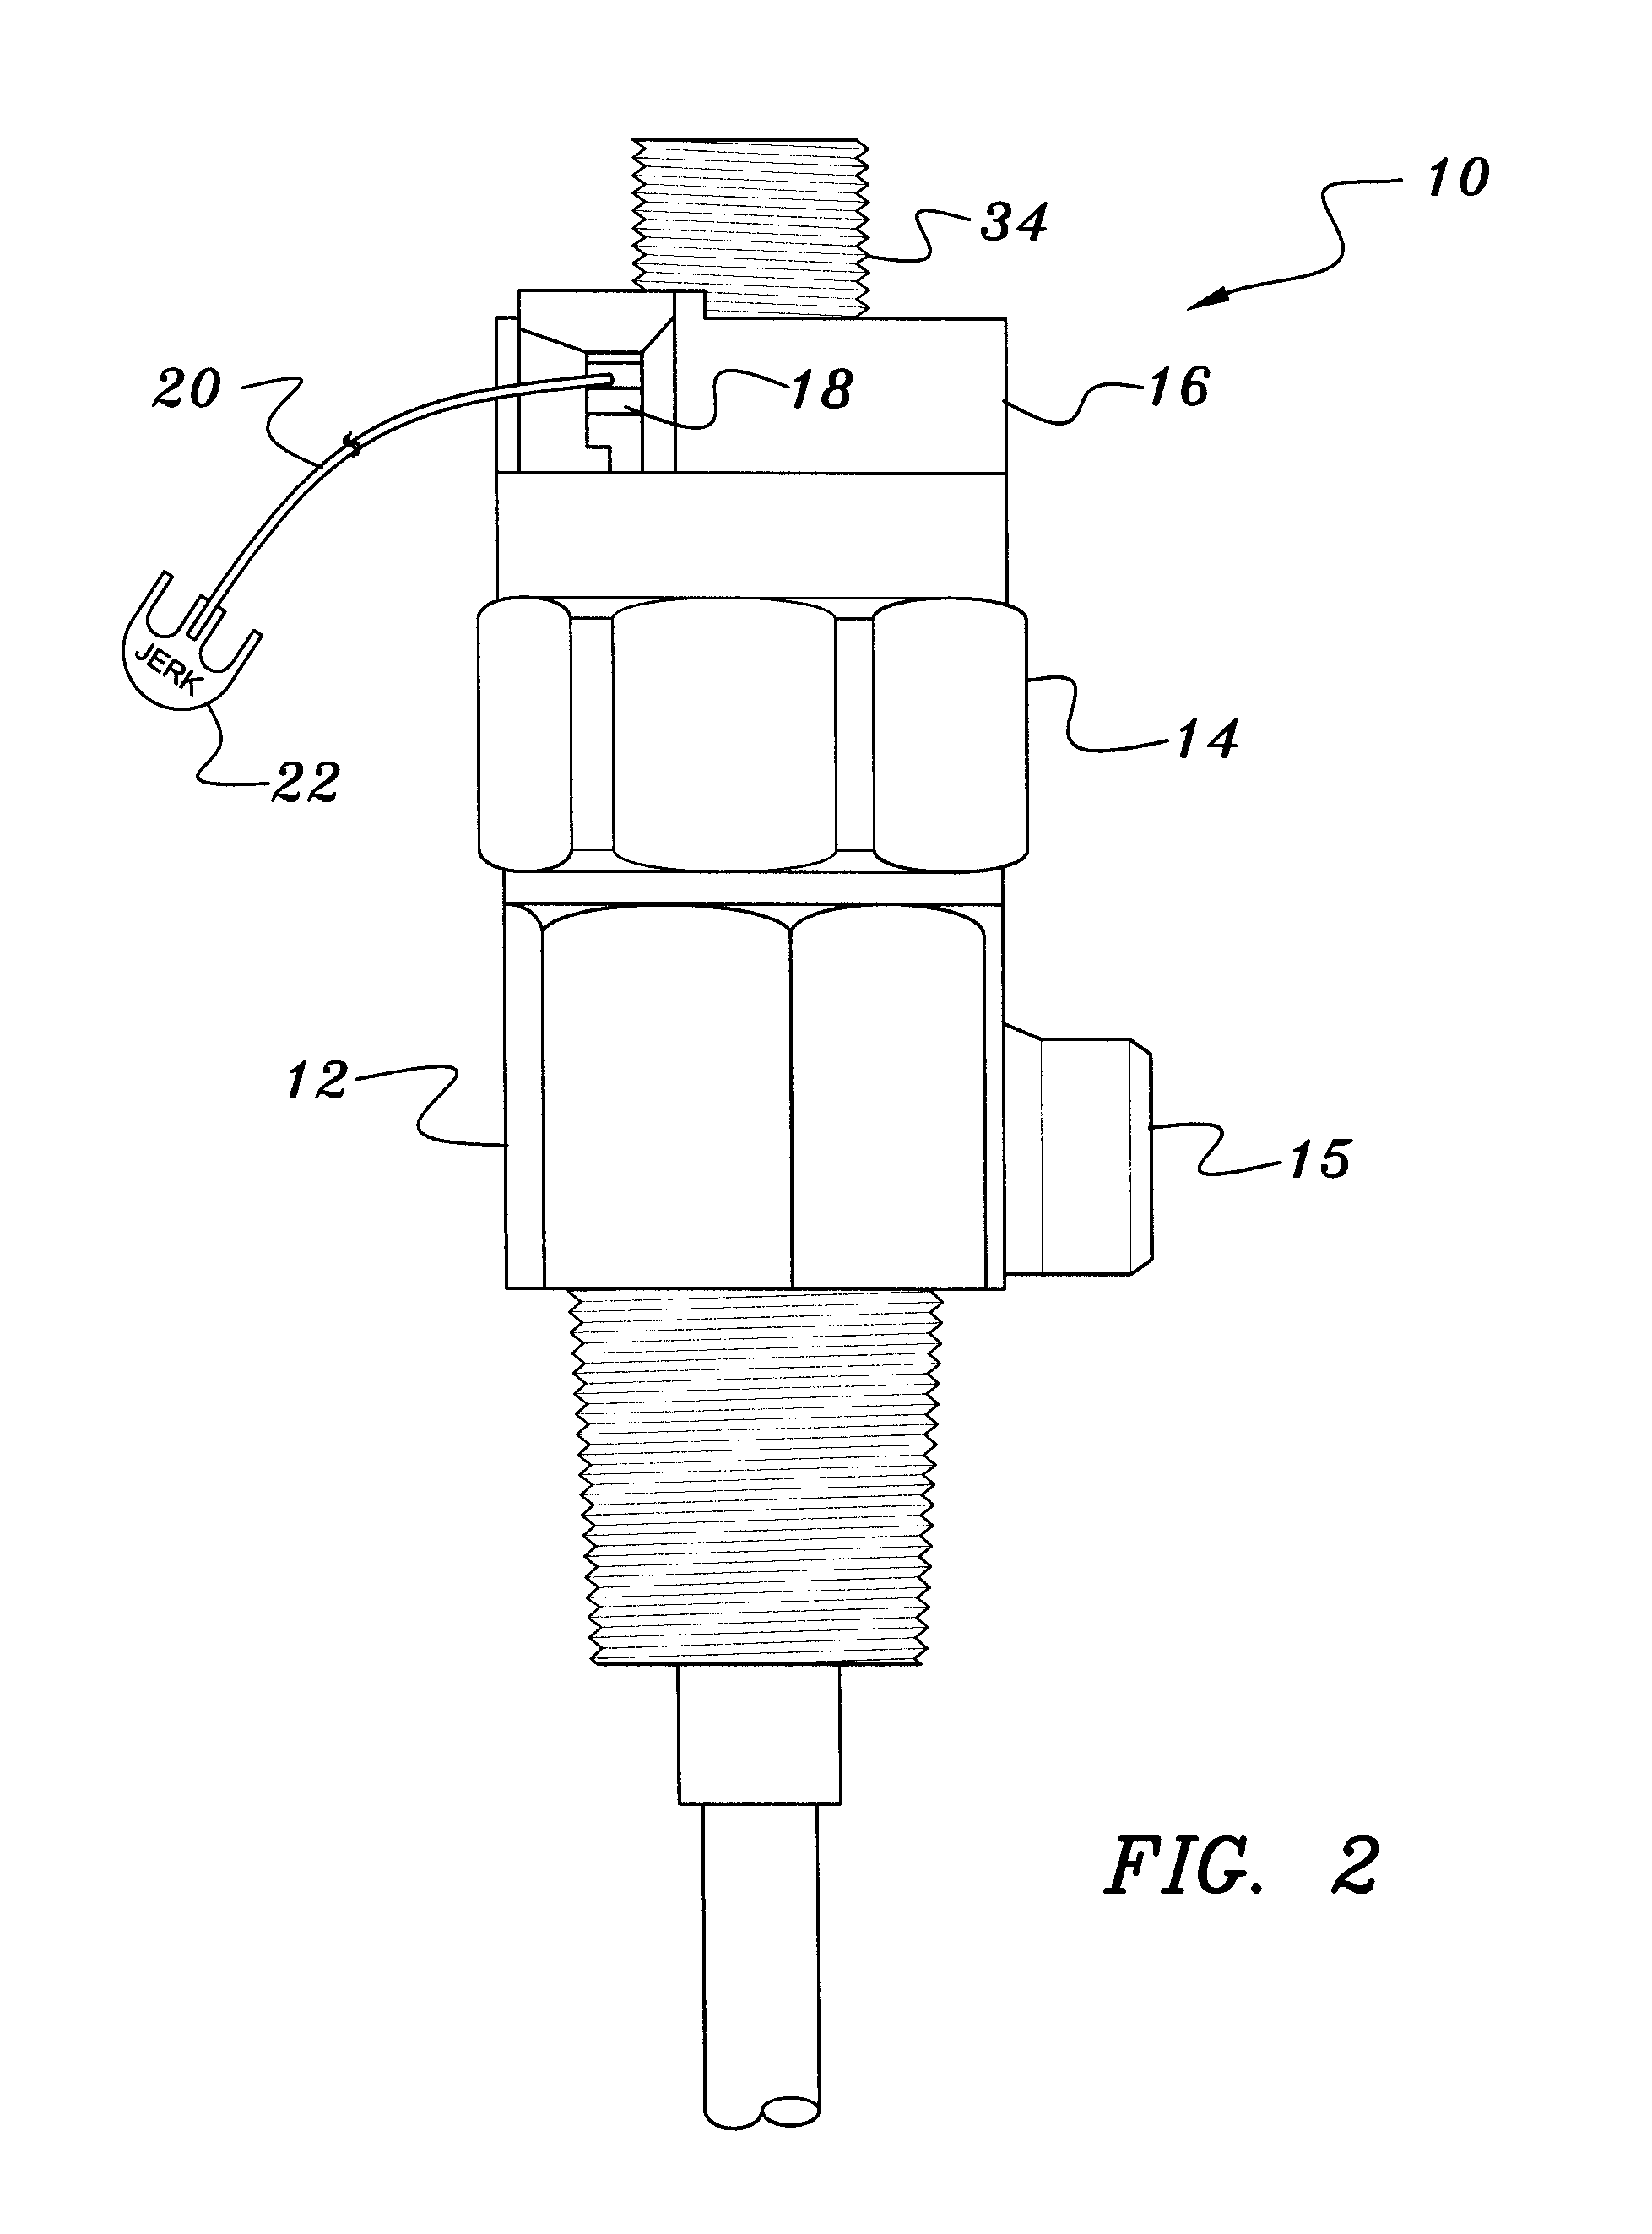 Inflation valve with pneumatic assist